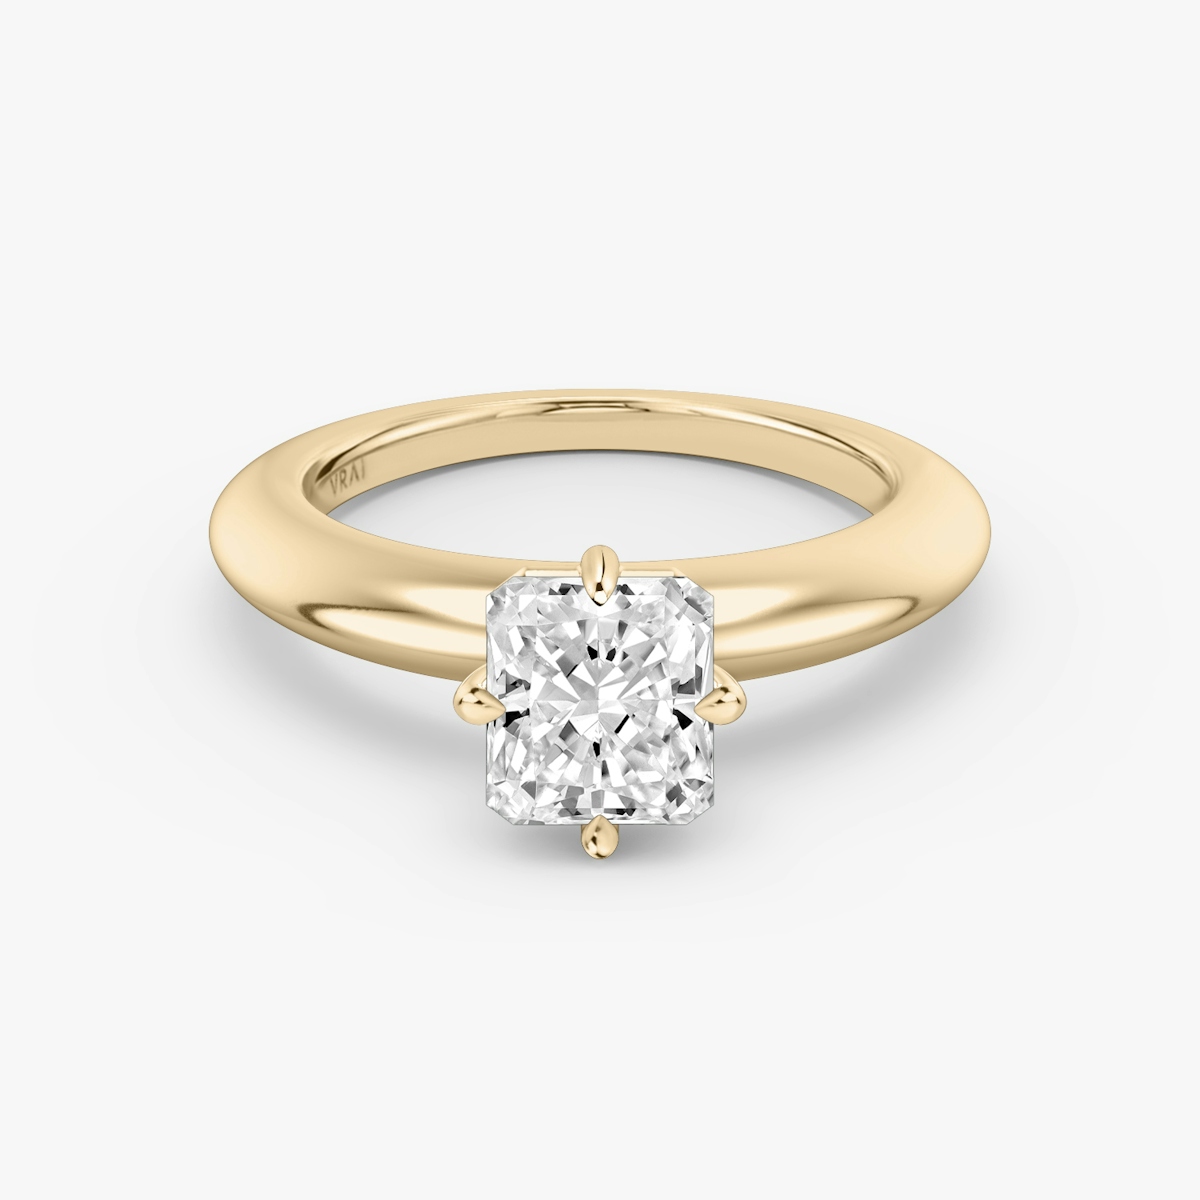 Dome Diamond Solitaire Modern Engagement Rings VRAI